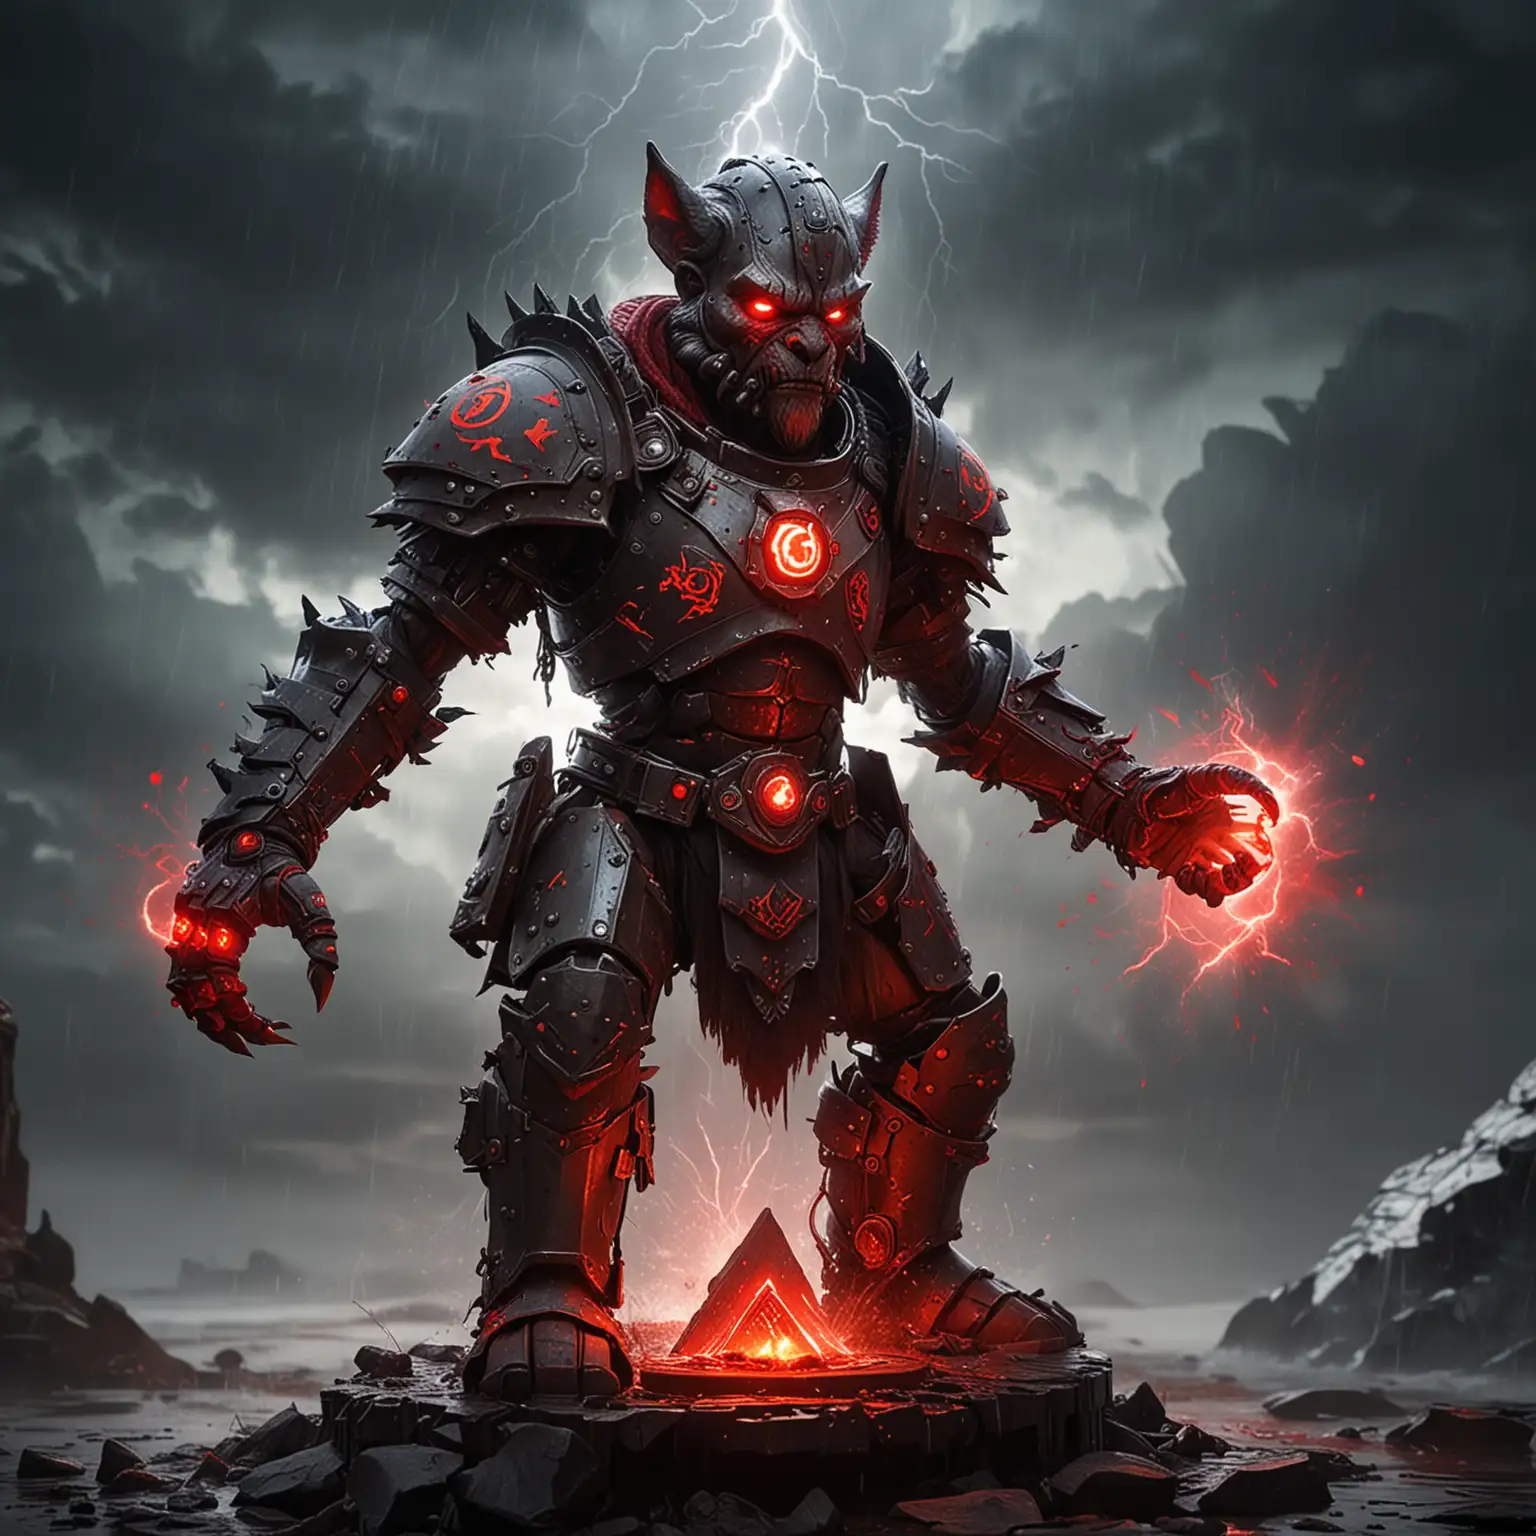 Blood Magic Robot WerewolfGnome Cyborg at Dawn in Ancient Plate Armor